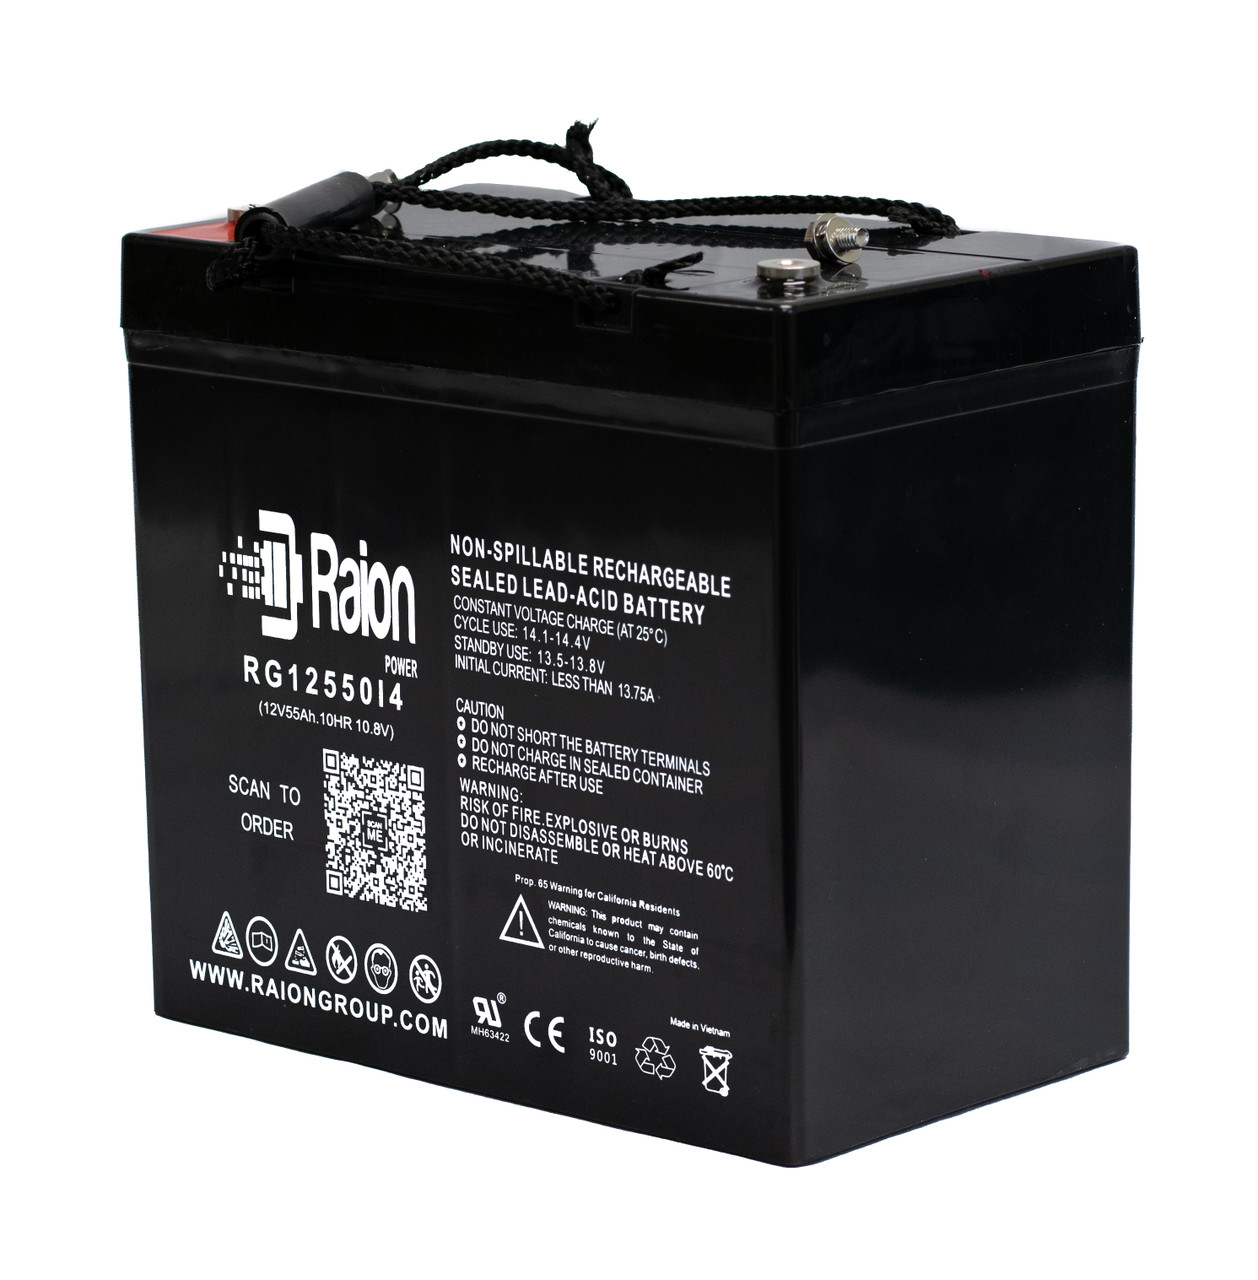 Raion Power 12V 55Ah 22NF Mobility Scooter Battery Replacement for Fortress Scooters Crusader